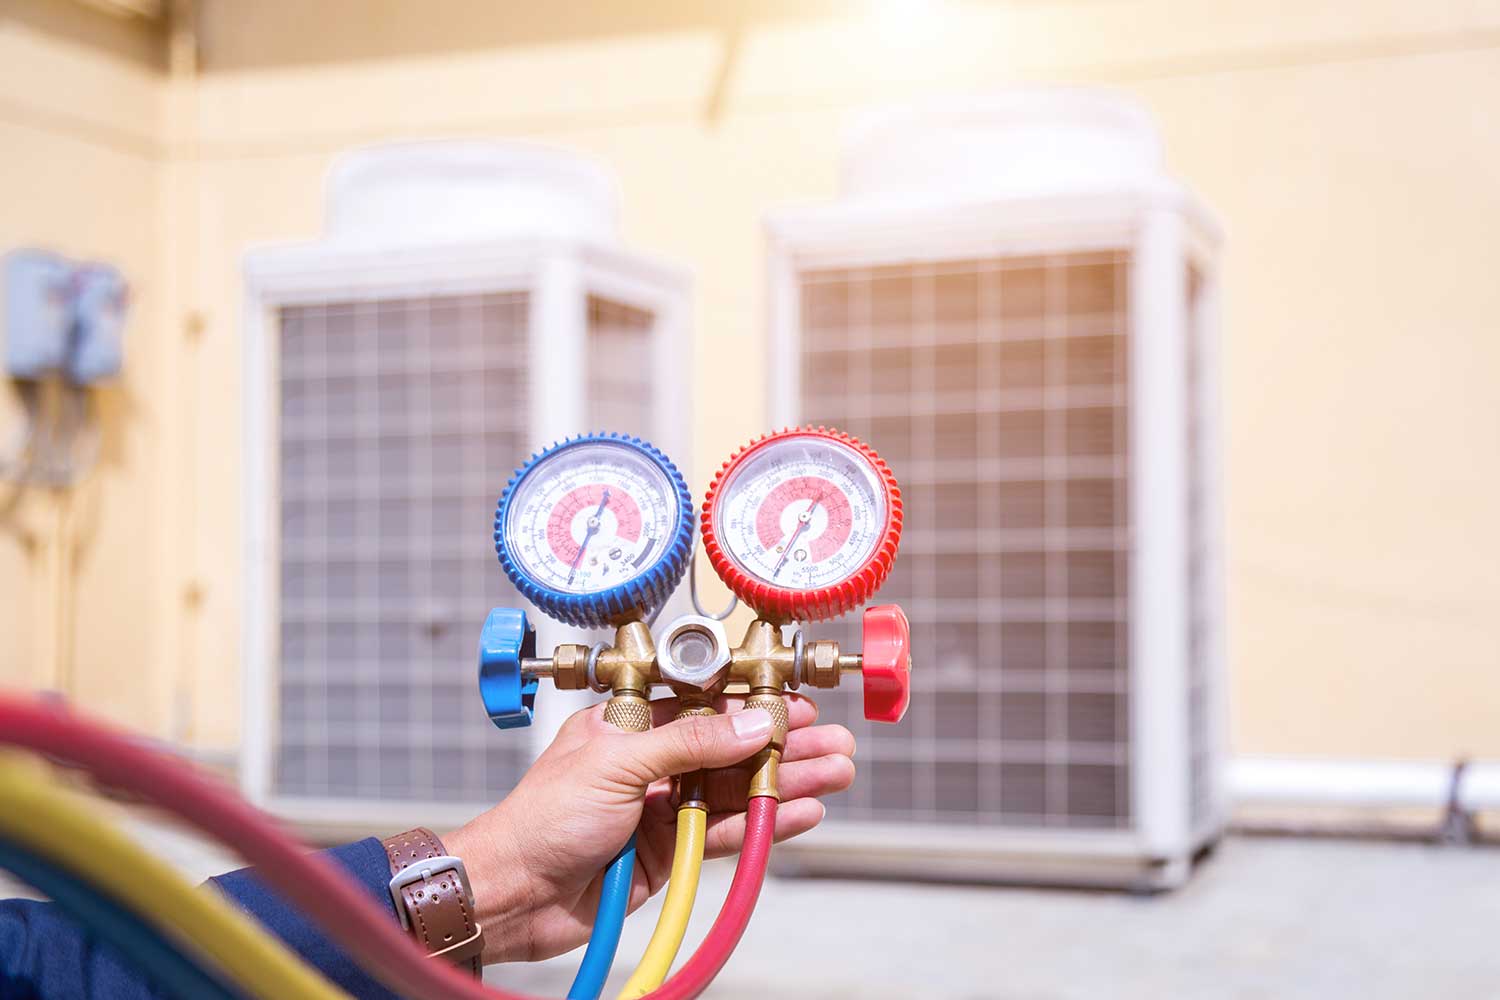 The difference between modern and old air conditioners and boilers